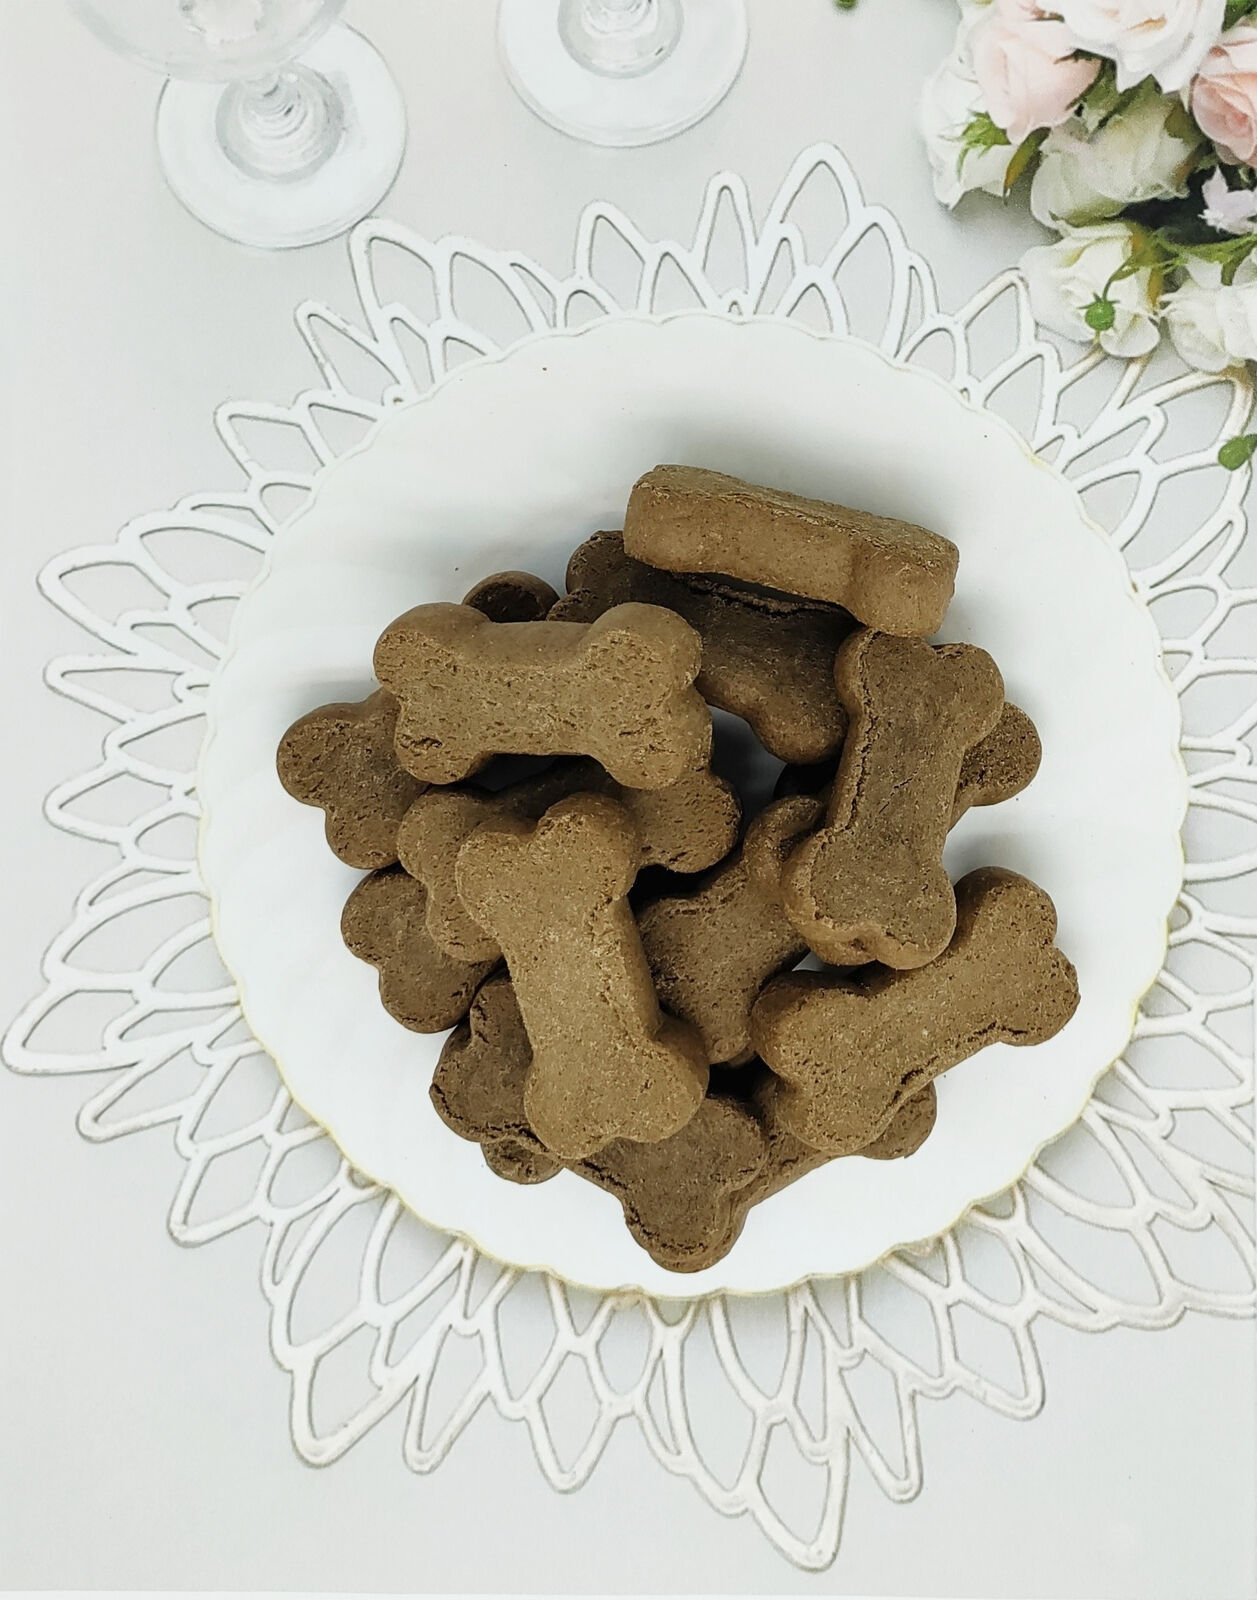 Cranberry, Smoked Bacon Biscuits dog treats, Urinary health, Crunchy Cravers